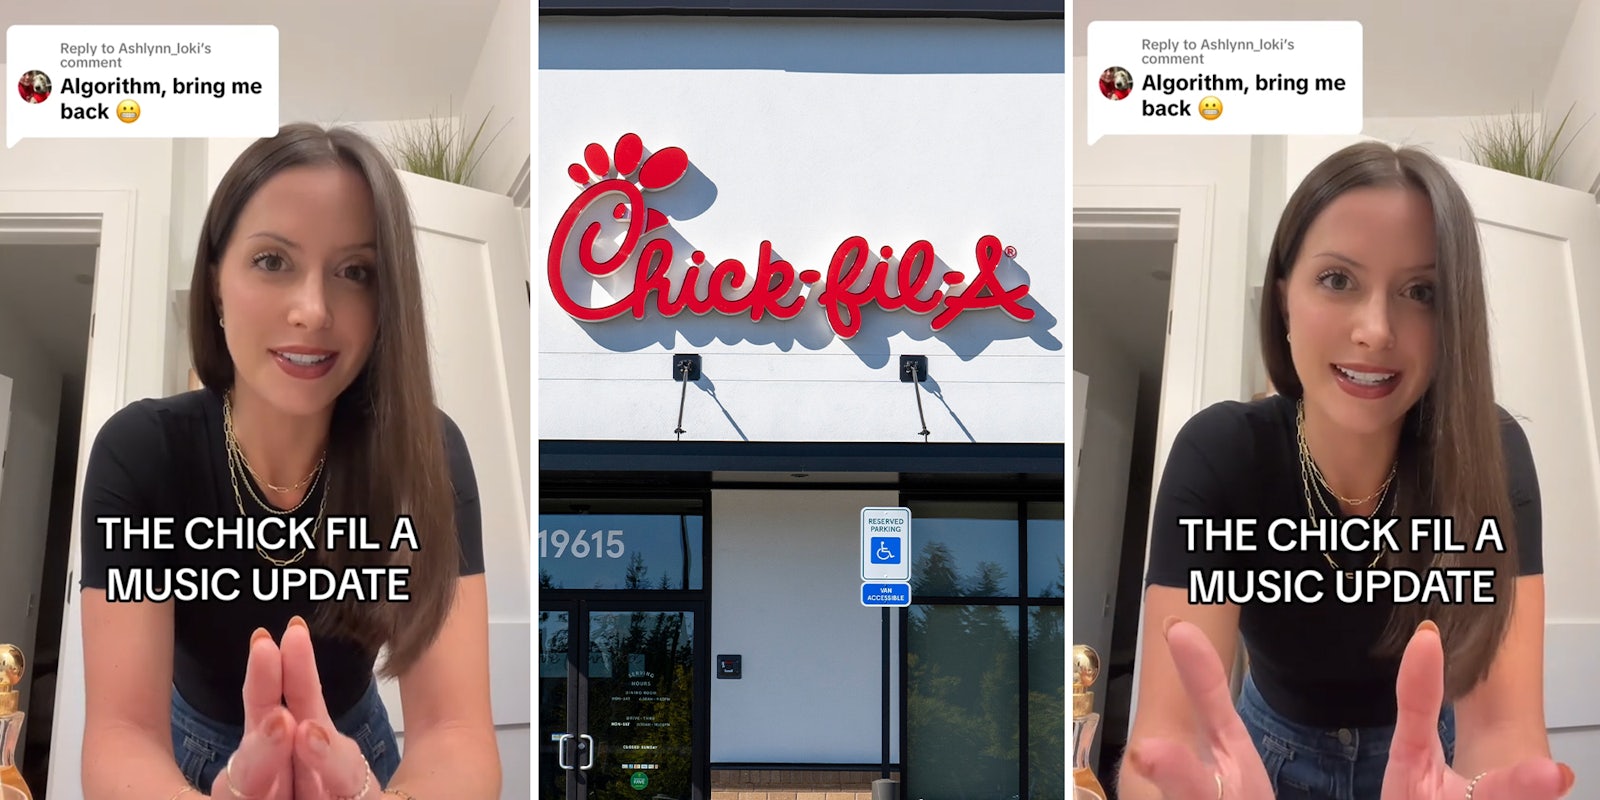 Woman calls out Chick-fil-A for blasting music at 2am. The manager finally responds